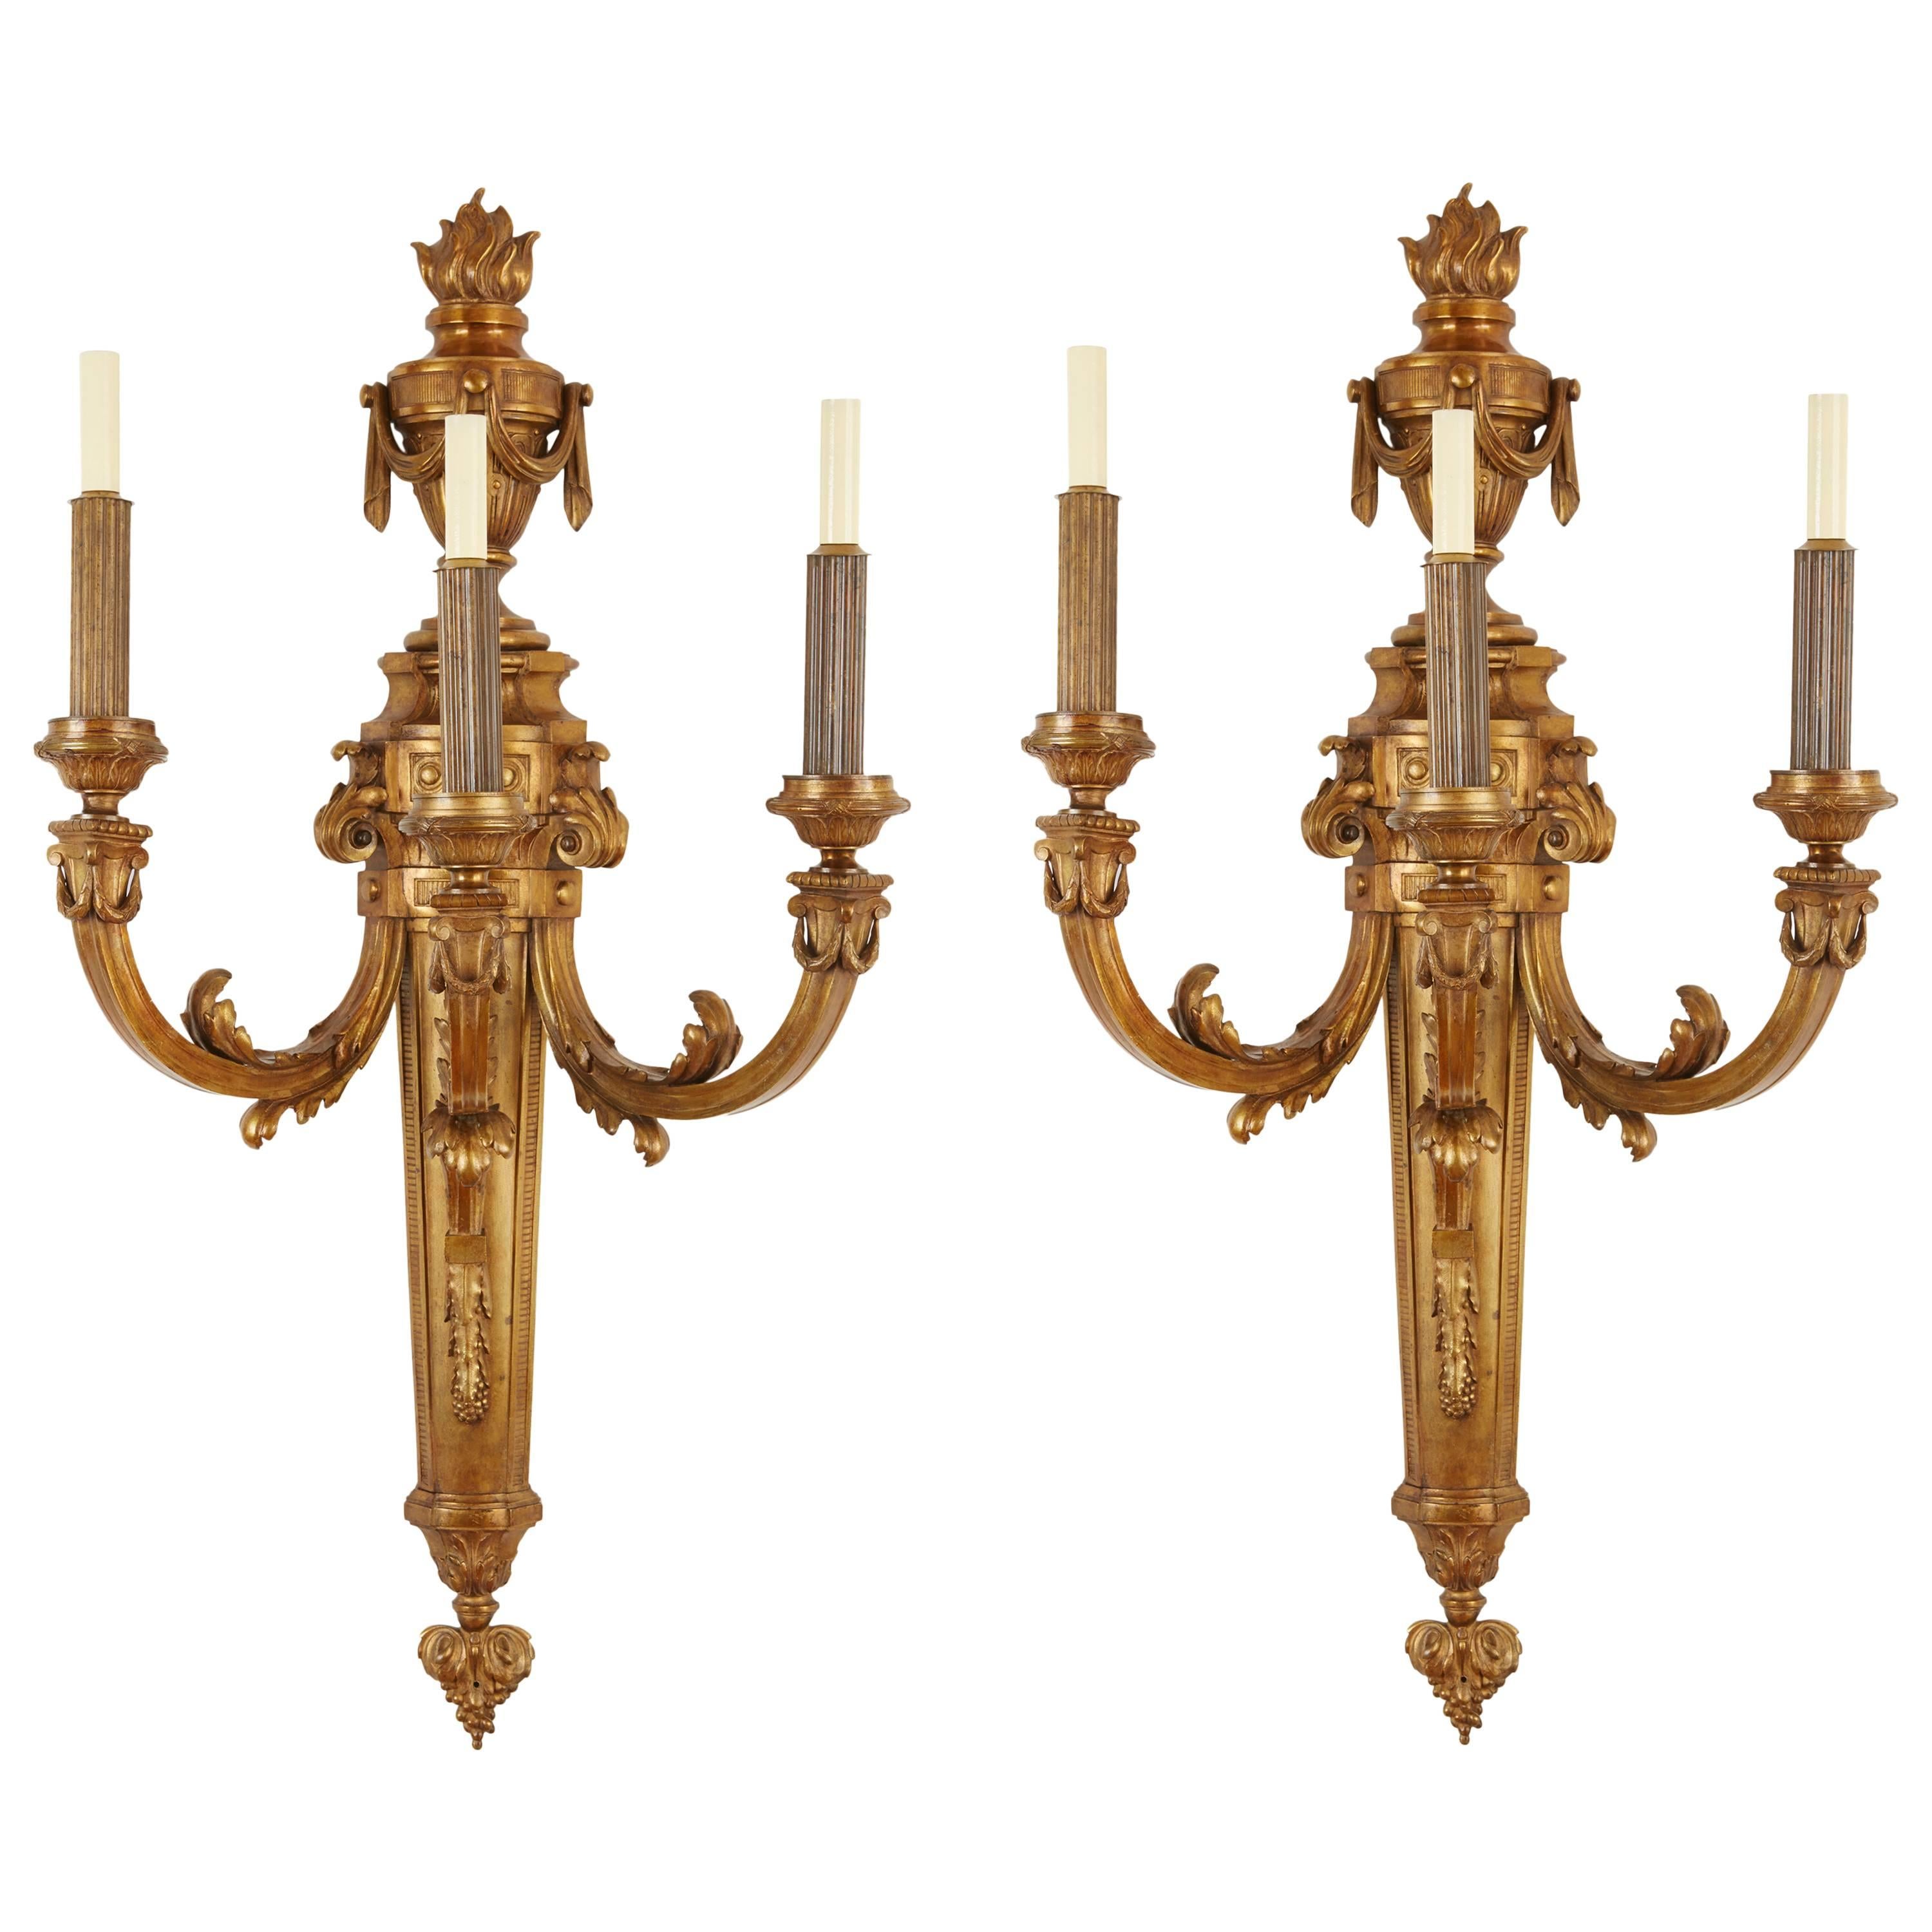 Extremely Large Pair of Louis XVI Style Three-Branch Ormolu Wall Lights For Sale